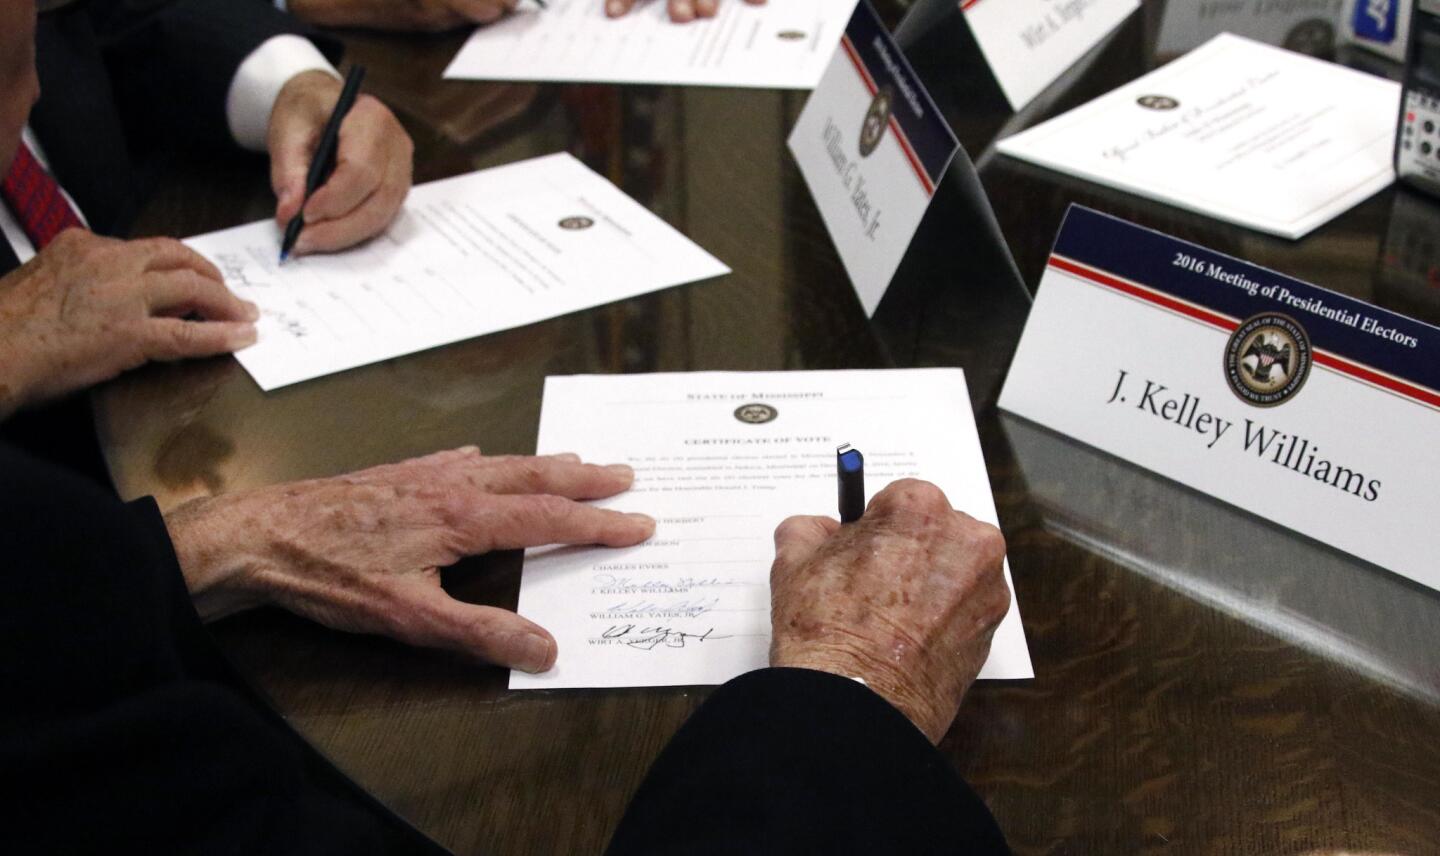 Members of the Mississippi Electoral College sign Certificates of Vote in the process of formally casting their electoral votes in the 2016 general election for president and vice president of the United States at the Capitol in Jackson, Miss.